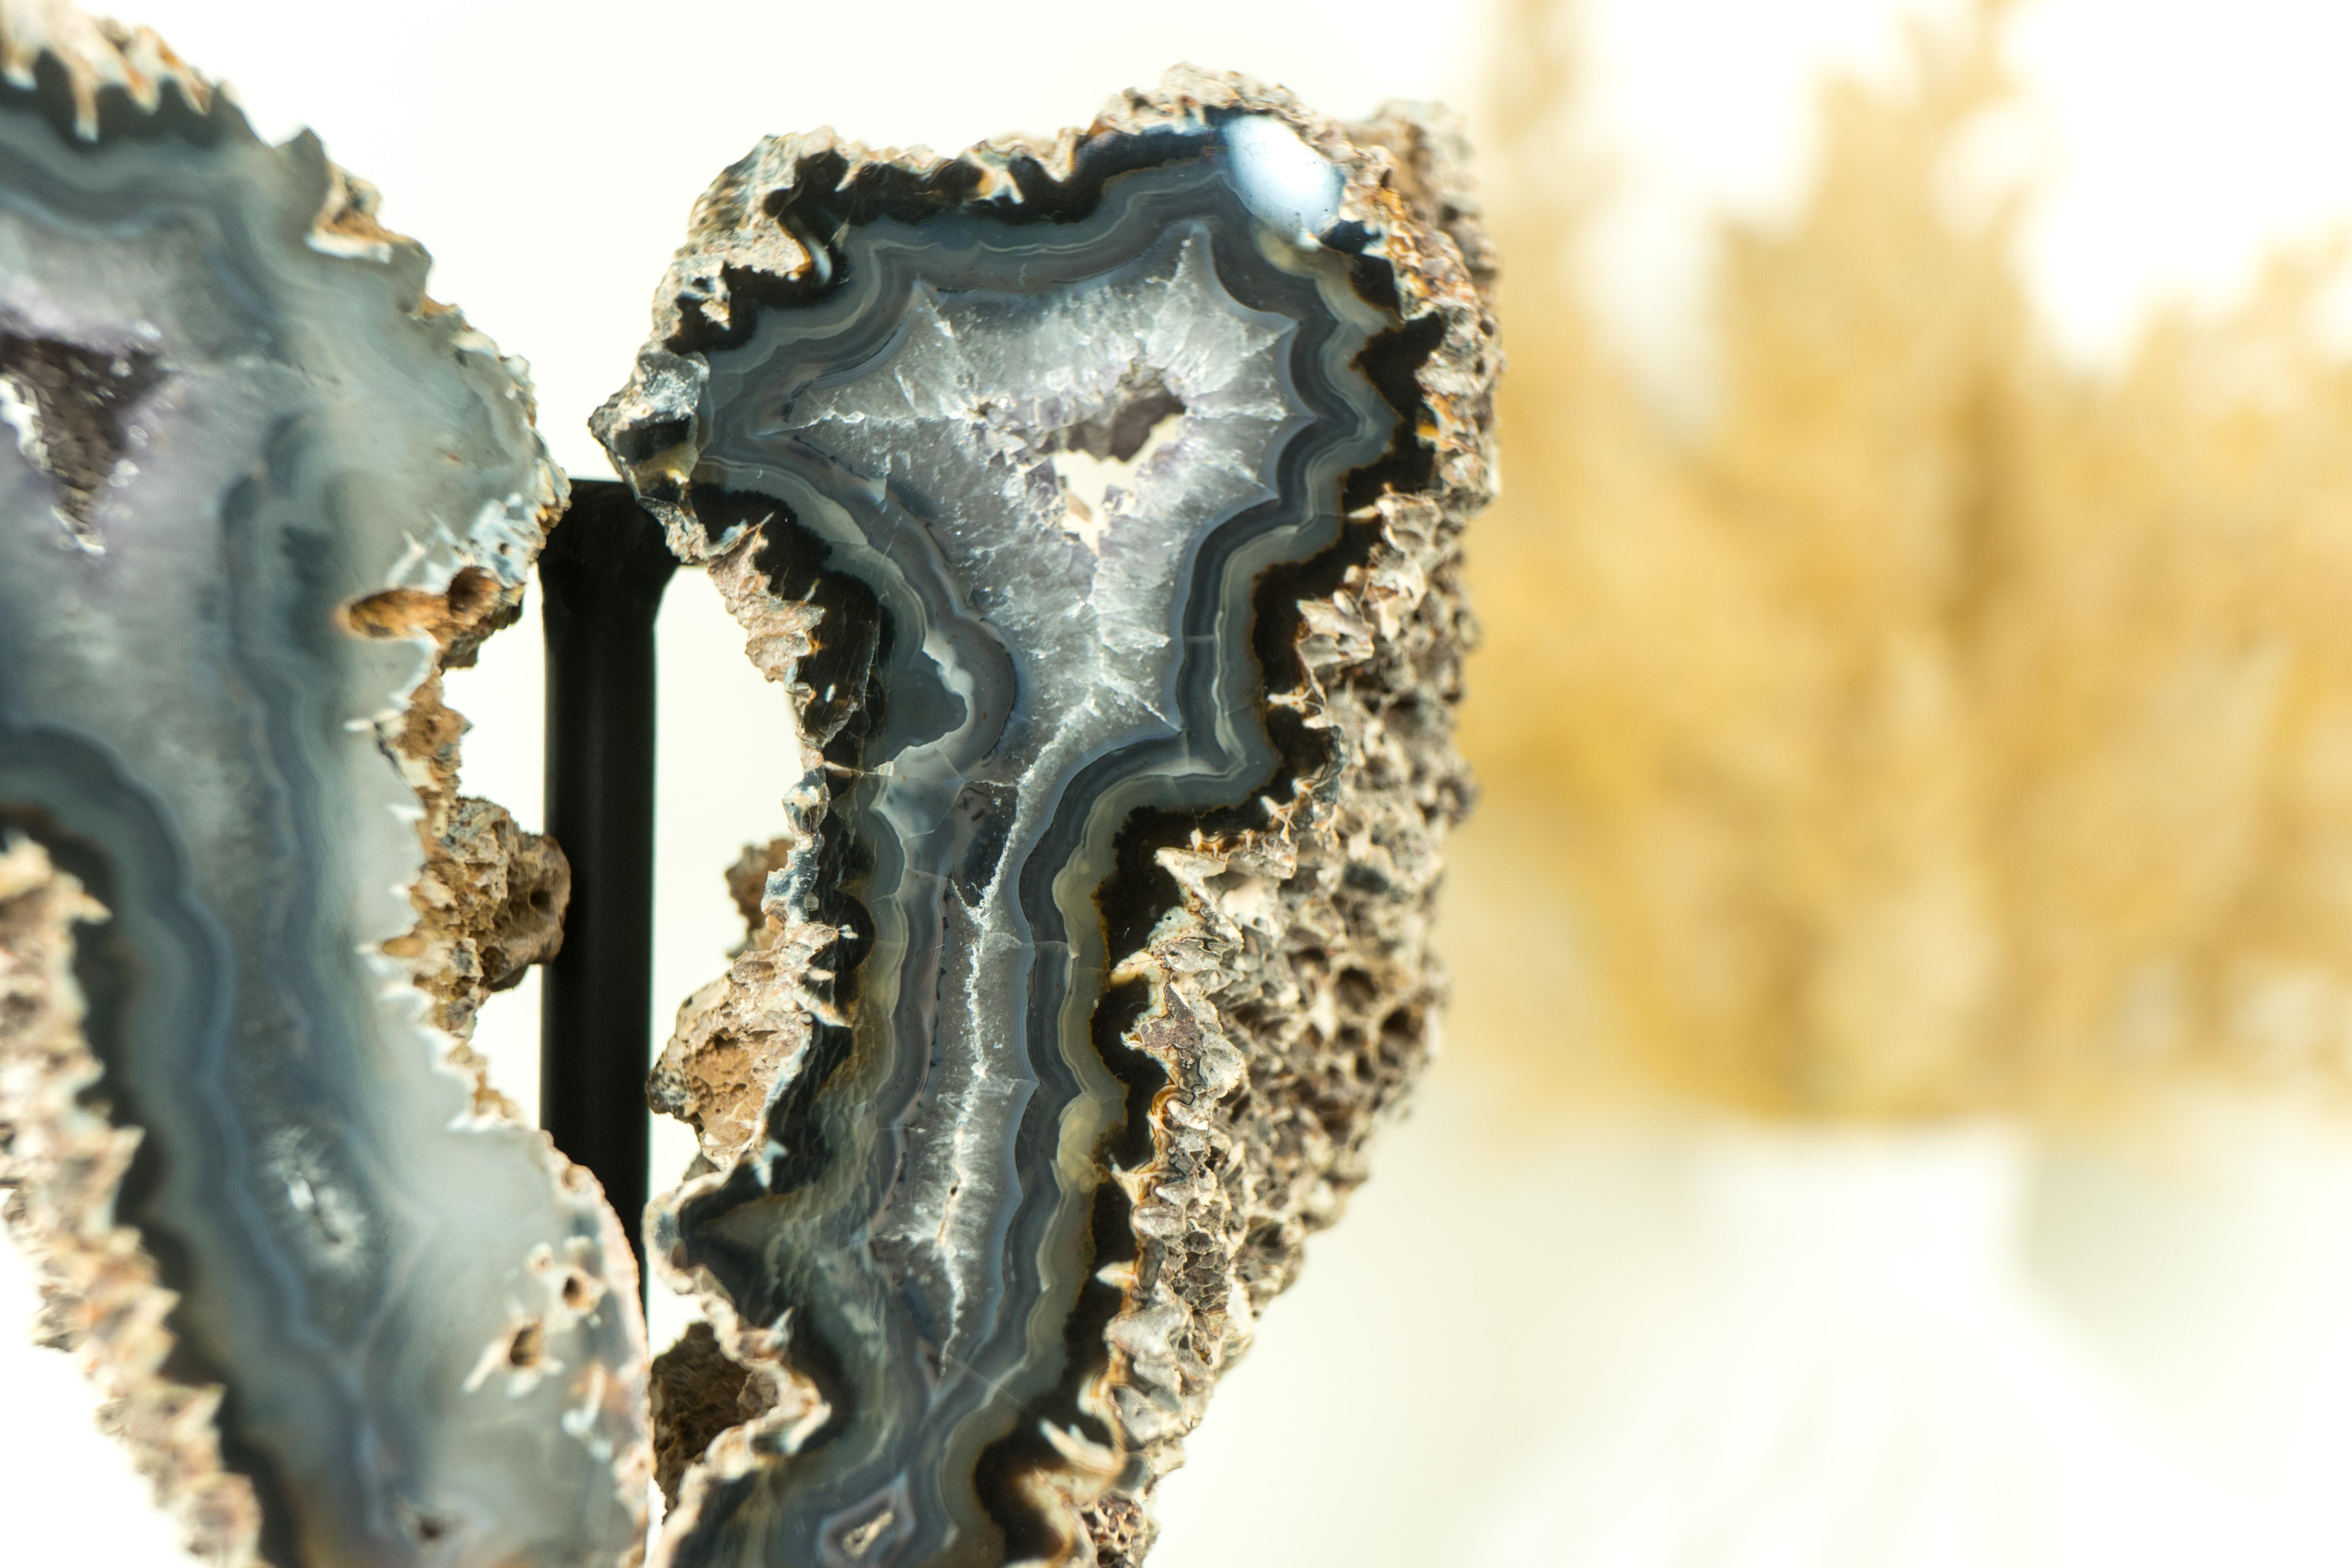 Contemporary Small Spiky Lace Agate Geode with Druzy, in Butterfly Wings Format, Intact For Sale